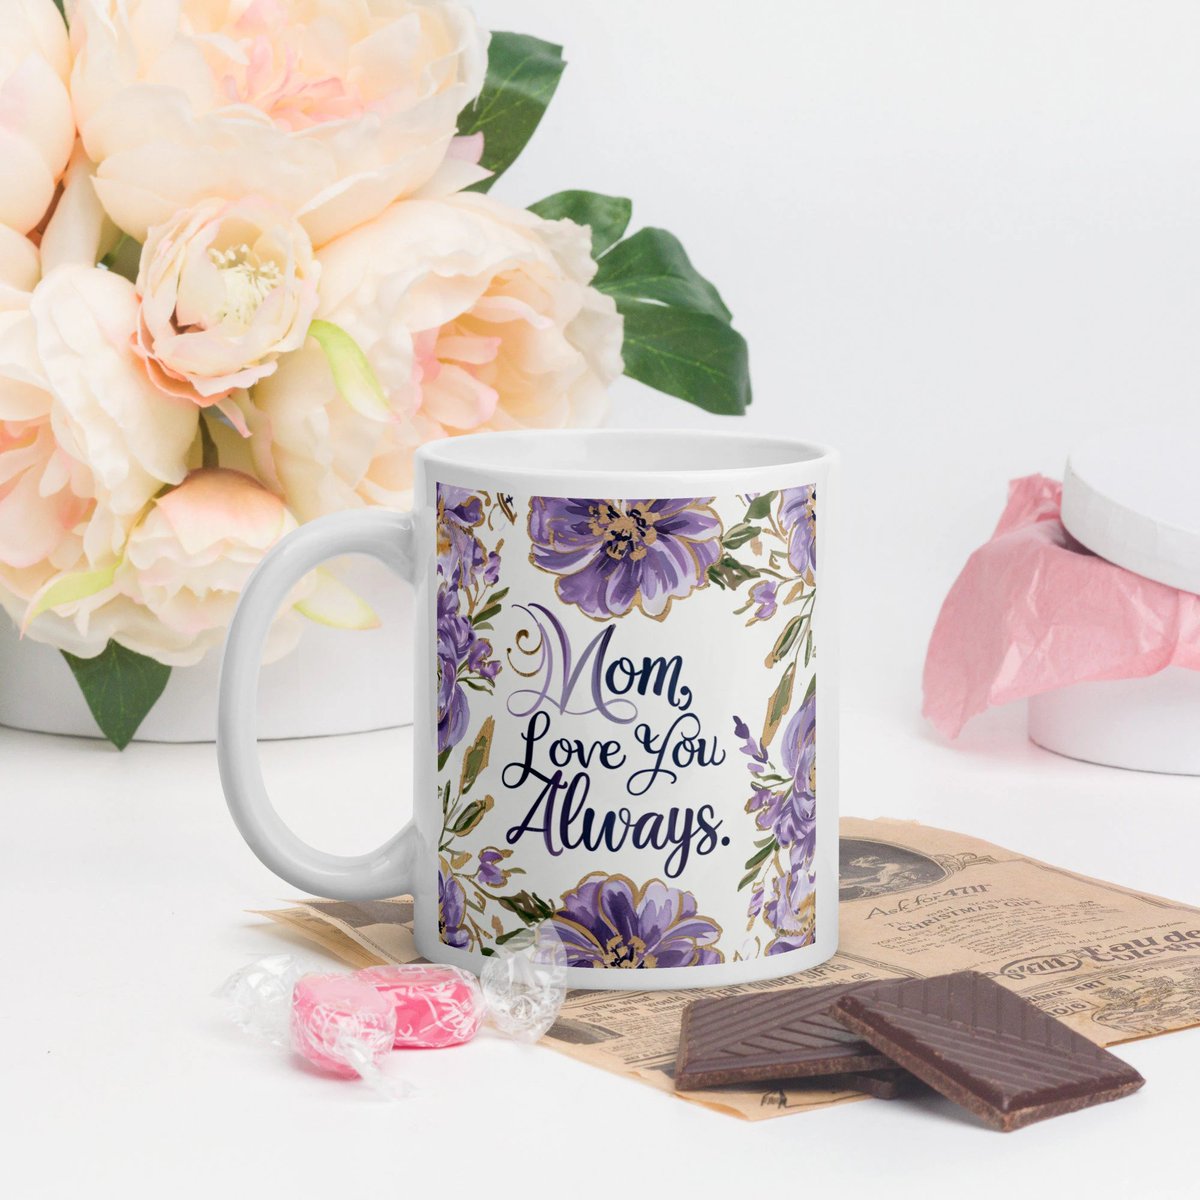 Gift mom love and warmth with our Floral Ceramic Mug 💜🌼 Perfect for coffee mornings or tea breaks. Free Shipping Available! #MomGifts #CeramicMug #FloralDesign #GiftsForHer #EtsyFinds #HomeDecor